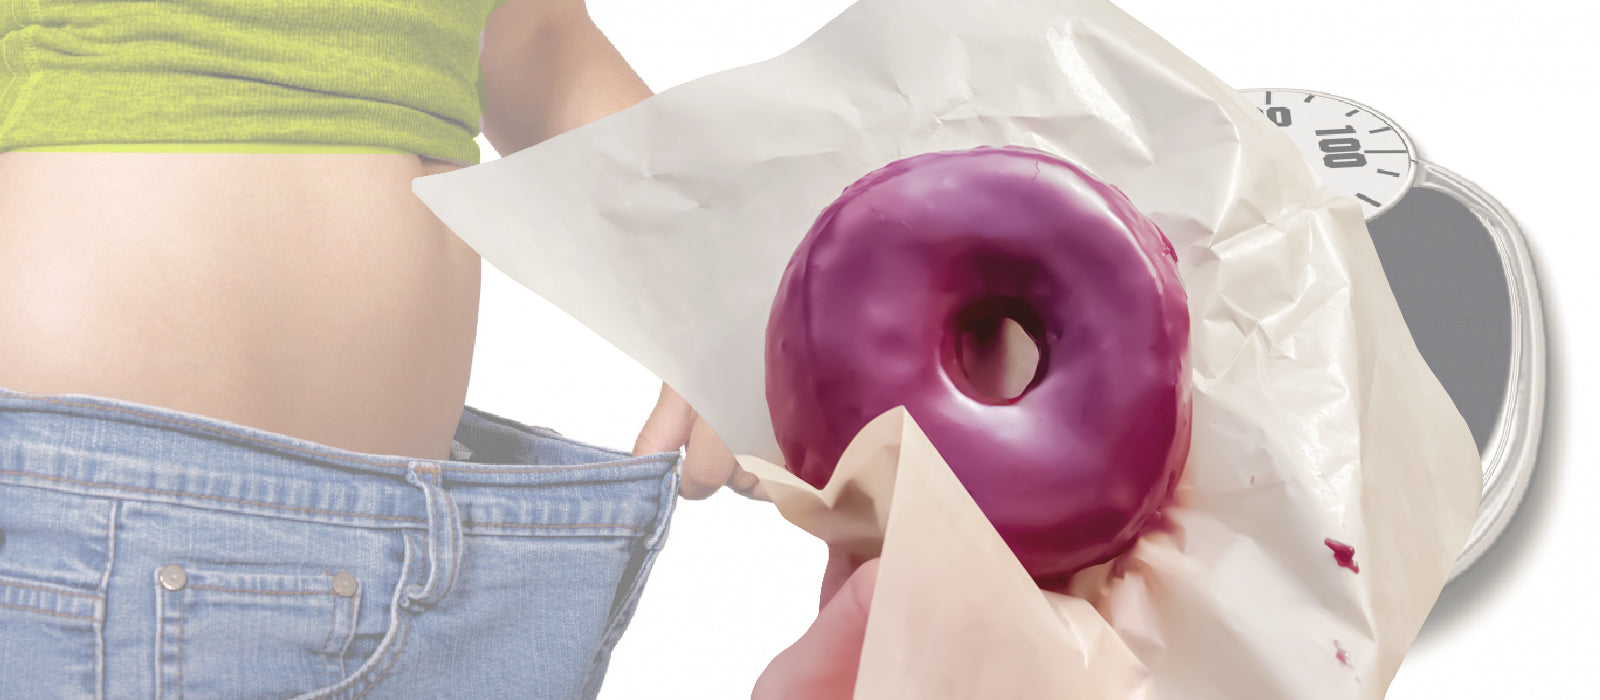 Lose Weight Sleeping and Eating Doughnuts